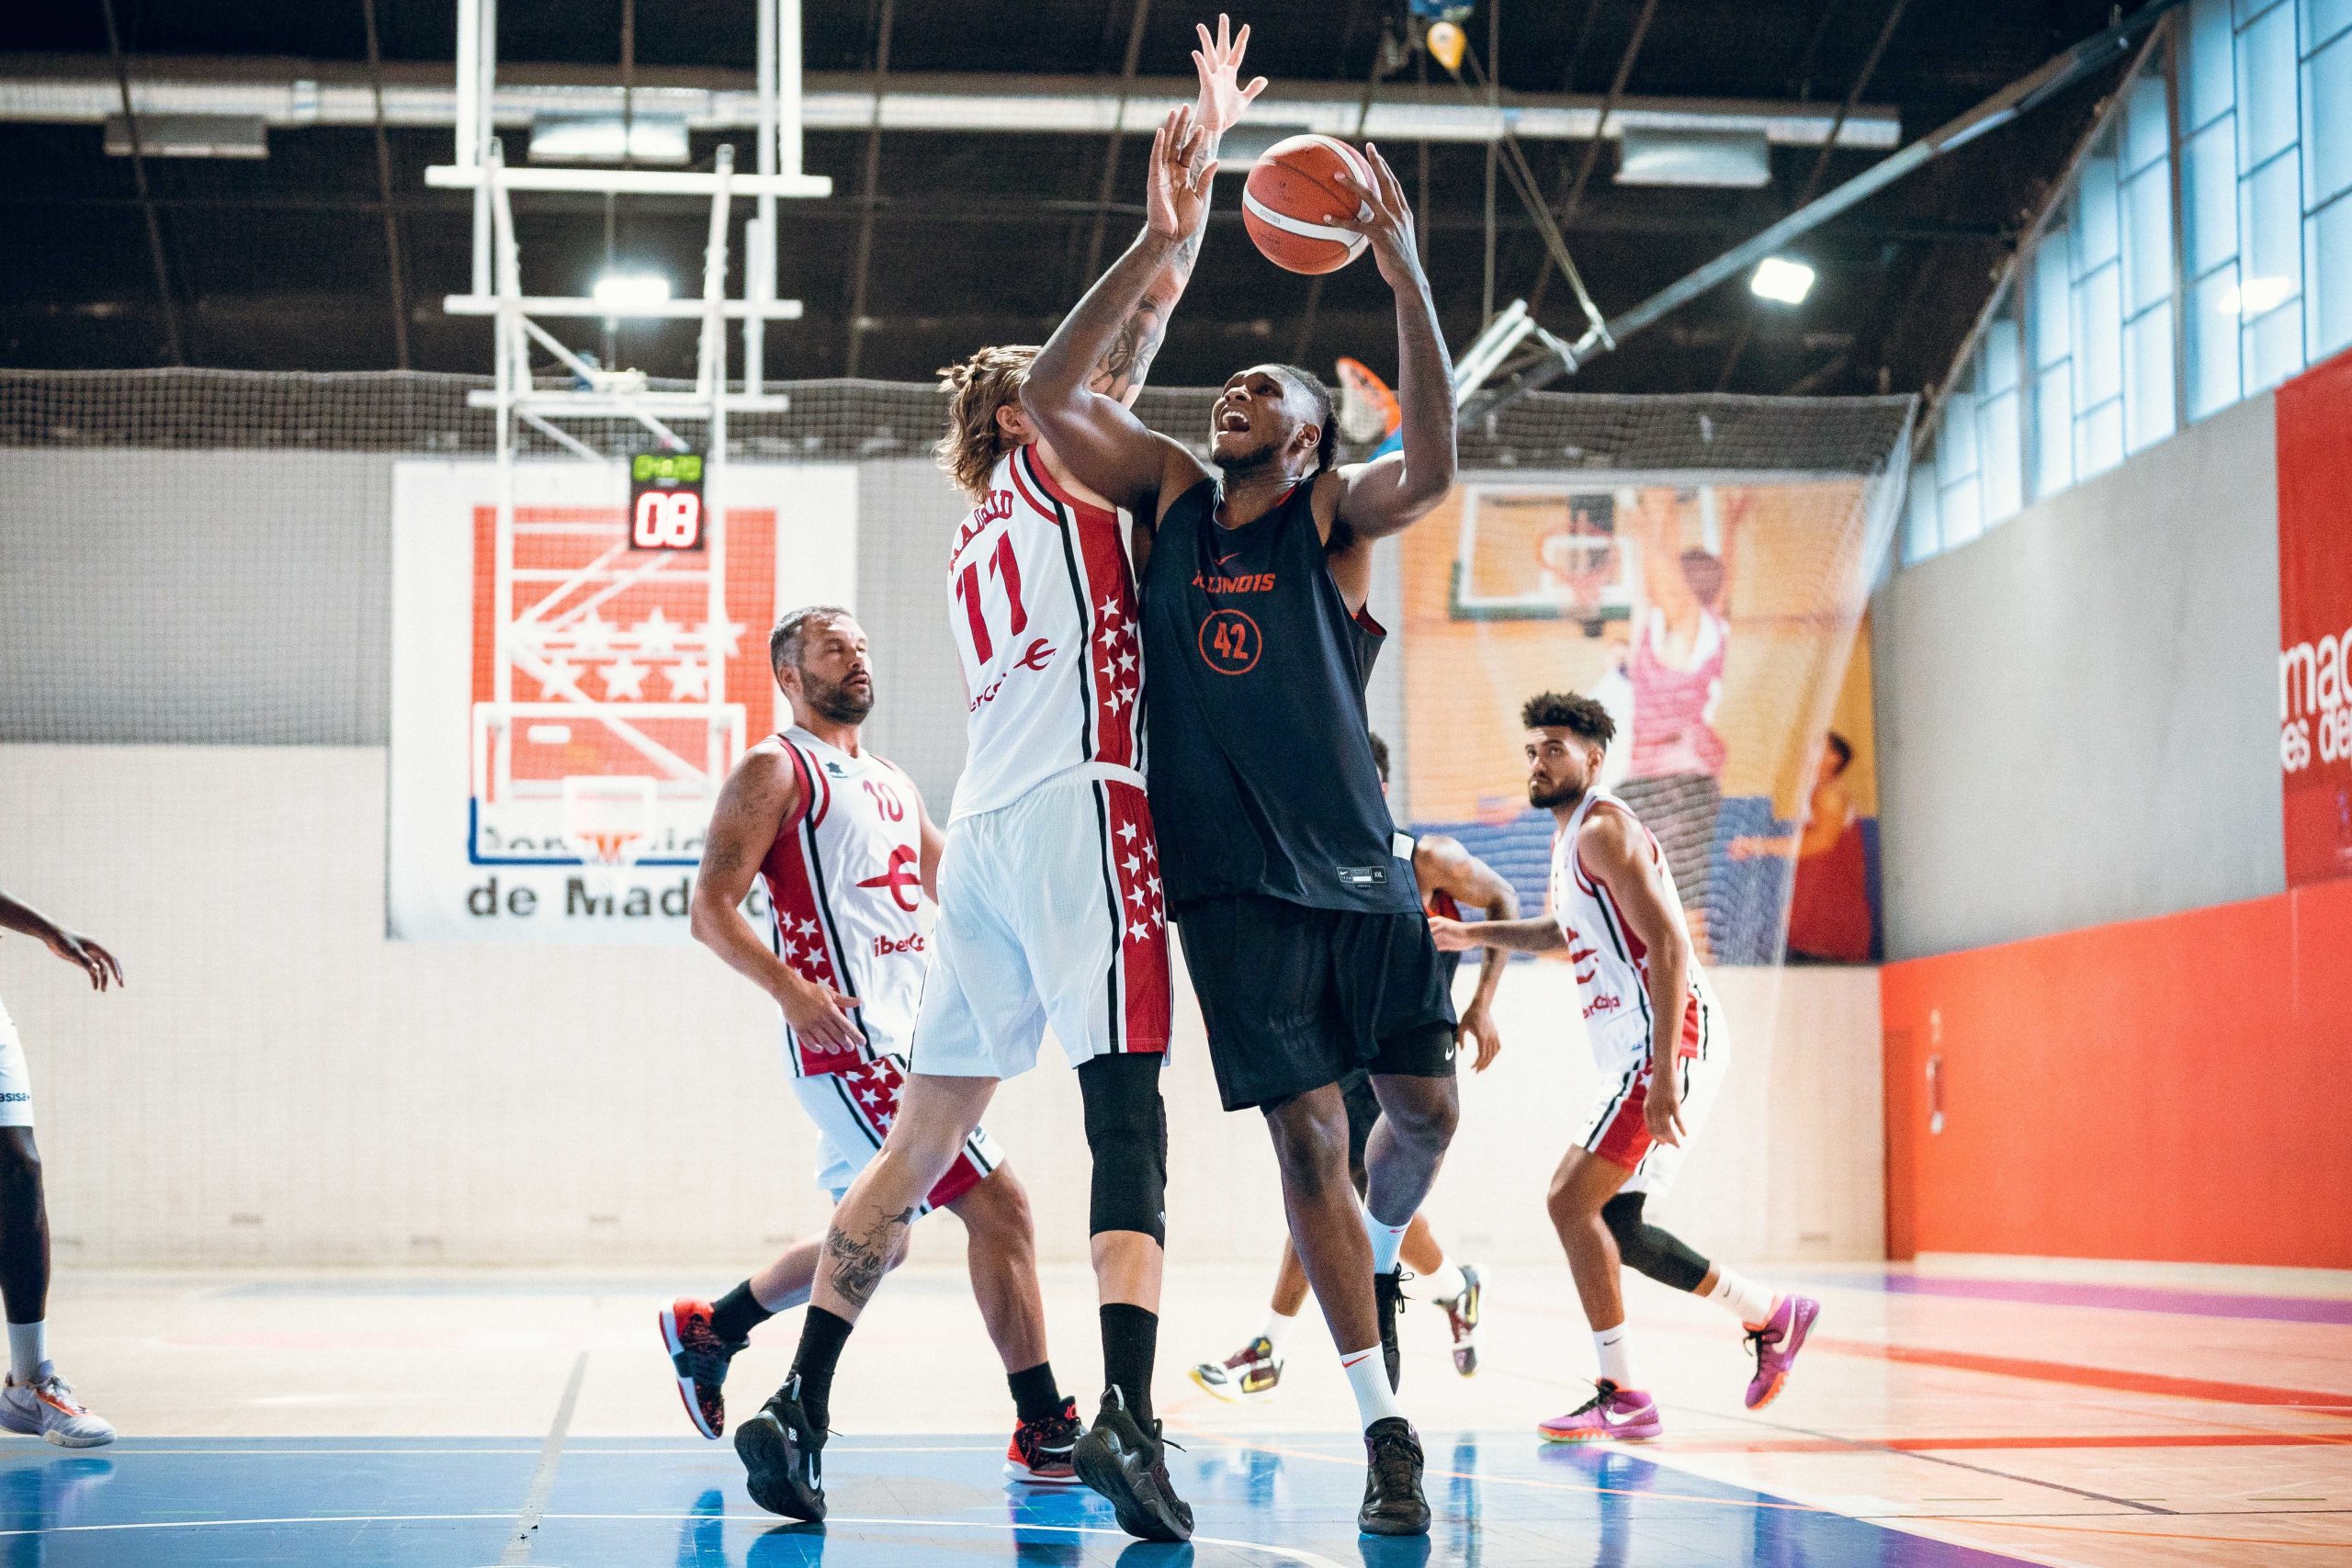 Illinois Rallies to Win First Exhibition Game in Spain